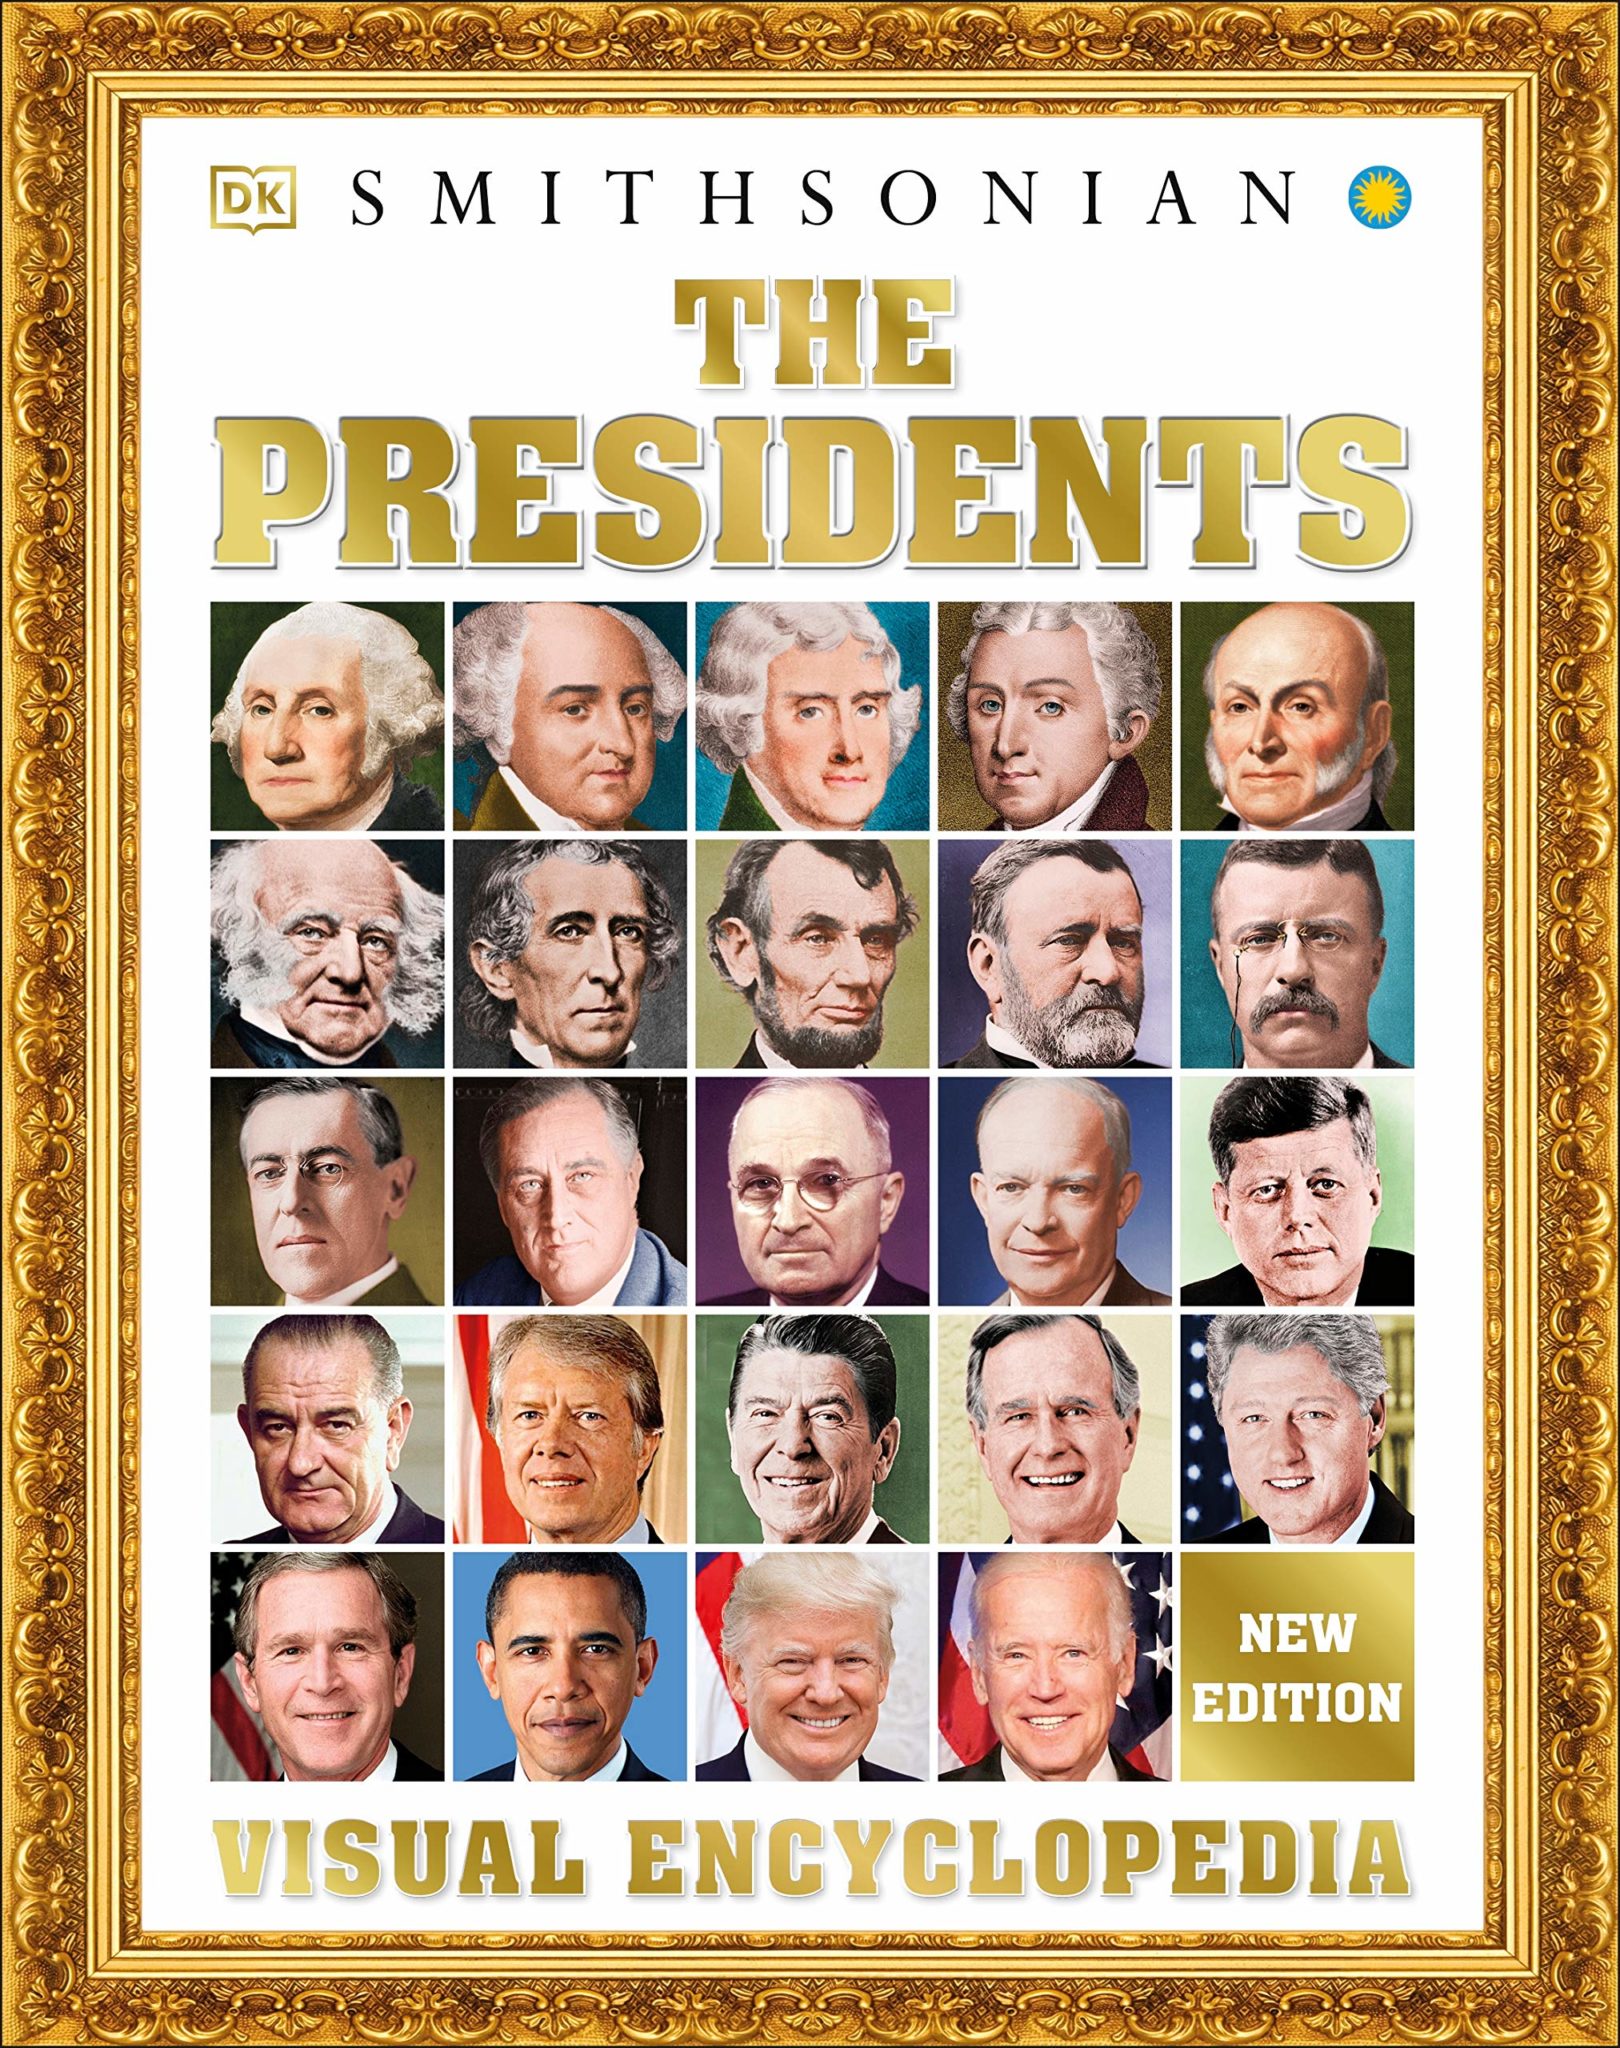 "The Presidents" book cover